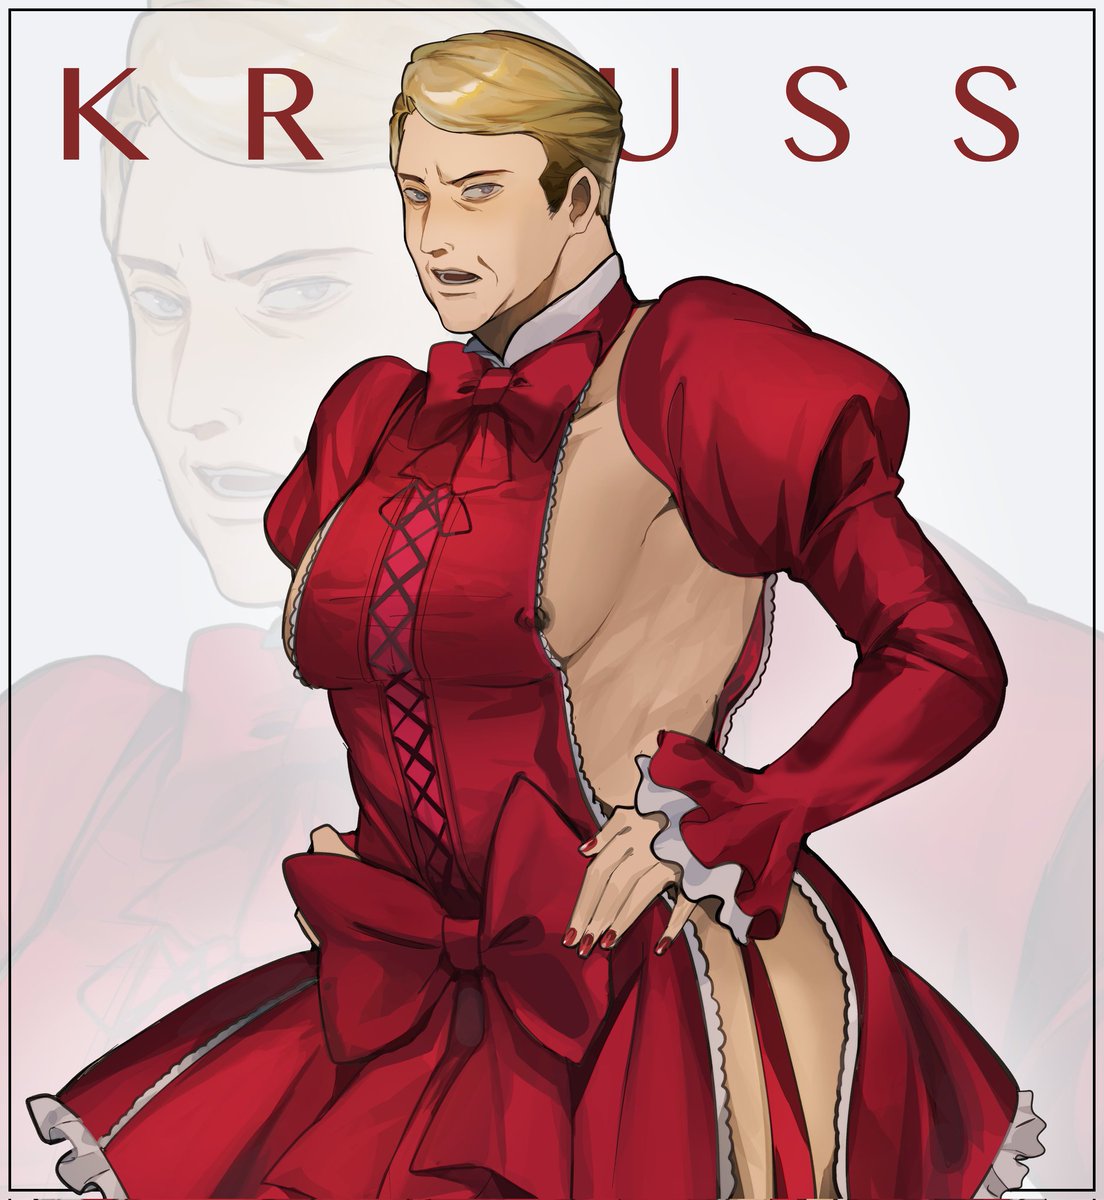 #nezumivastream Sorry my hand slipped Krauss in Gaap clothes 😳😳👍 anyway tangent krauss is actually my type visually